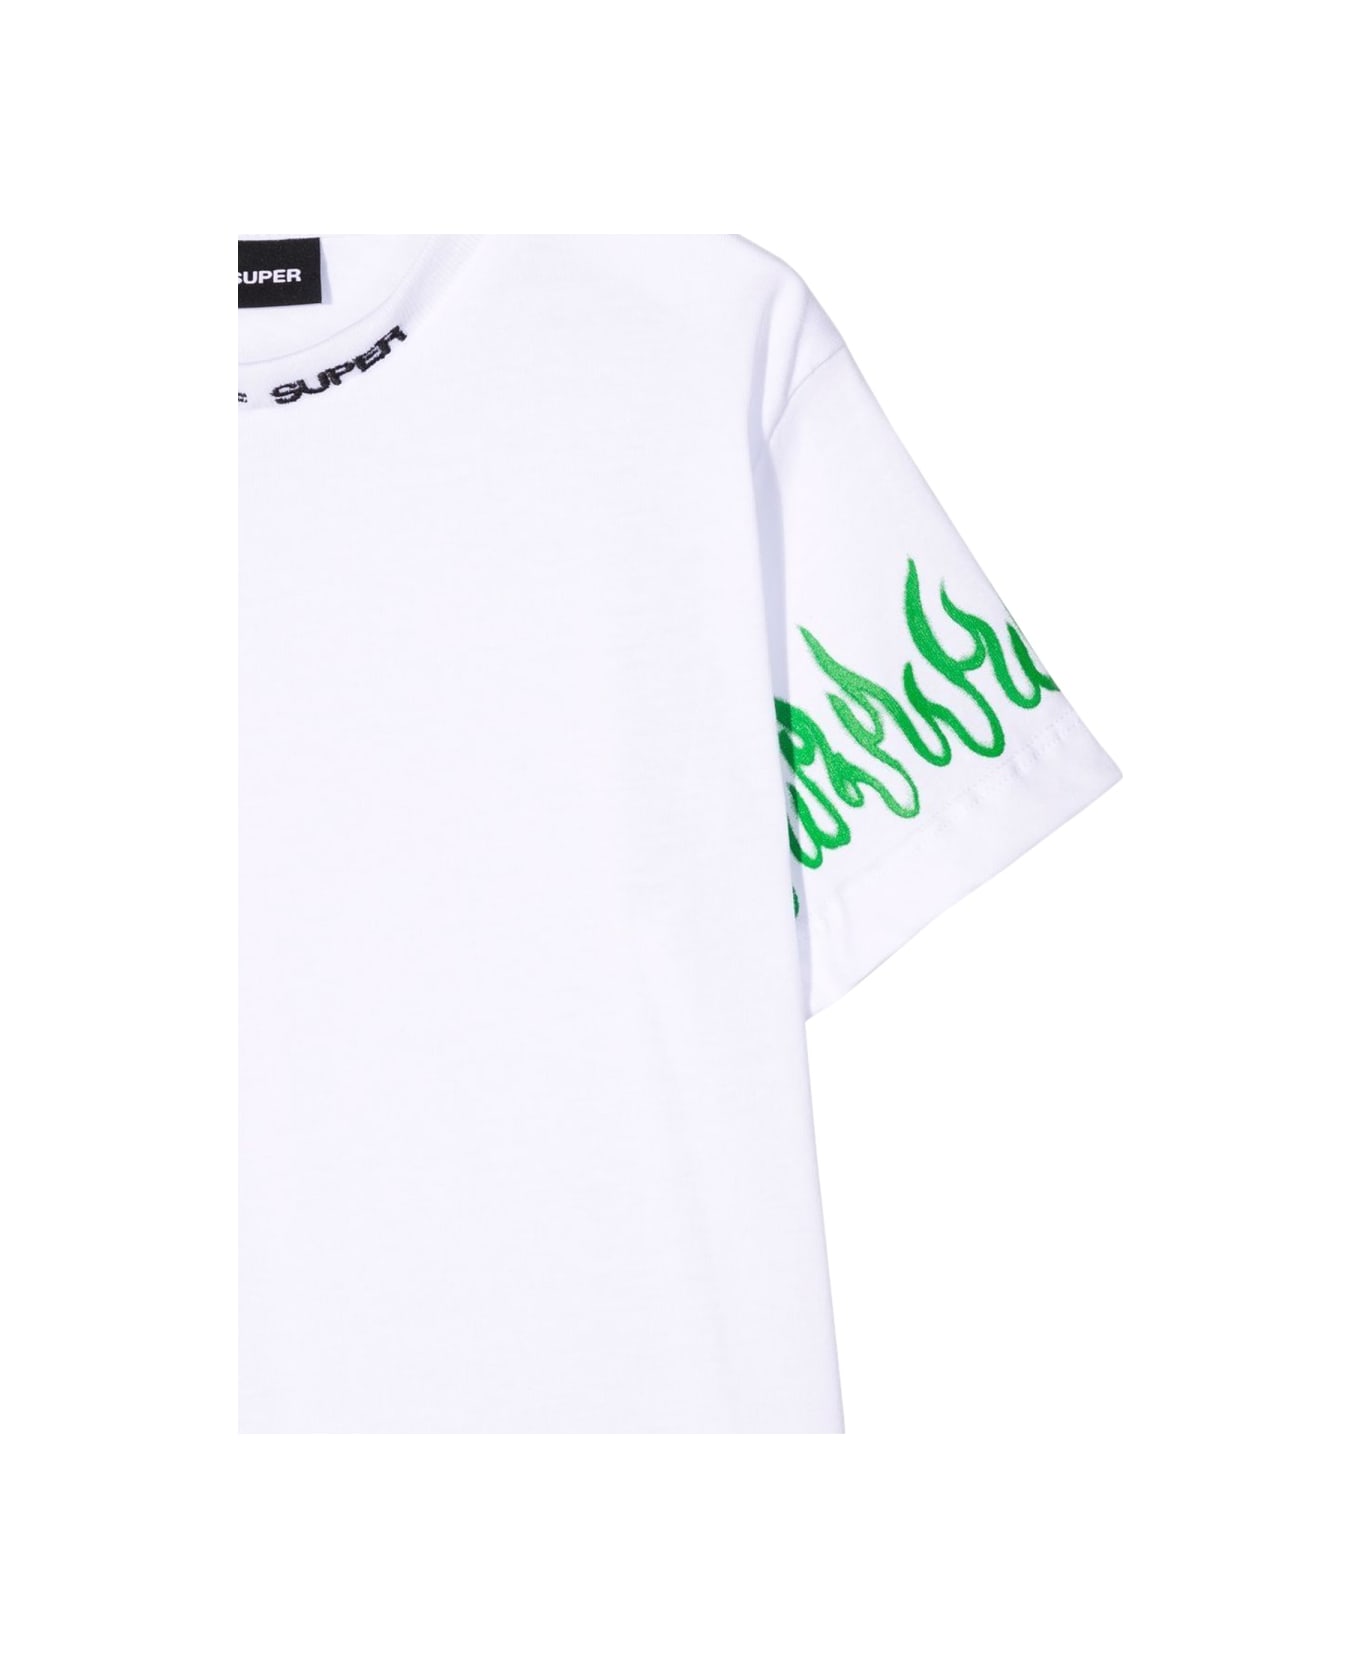 Vision of Super T-shirt With Green Spray Flames - WHITE